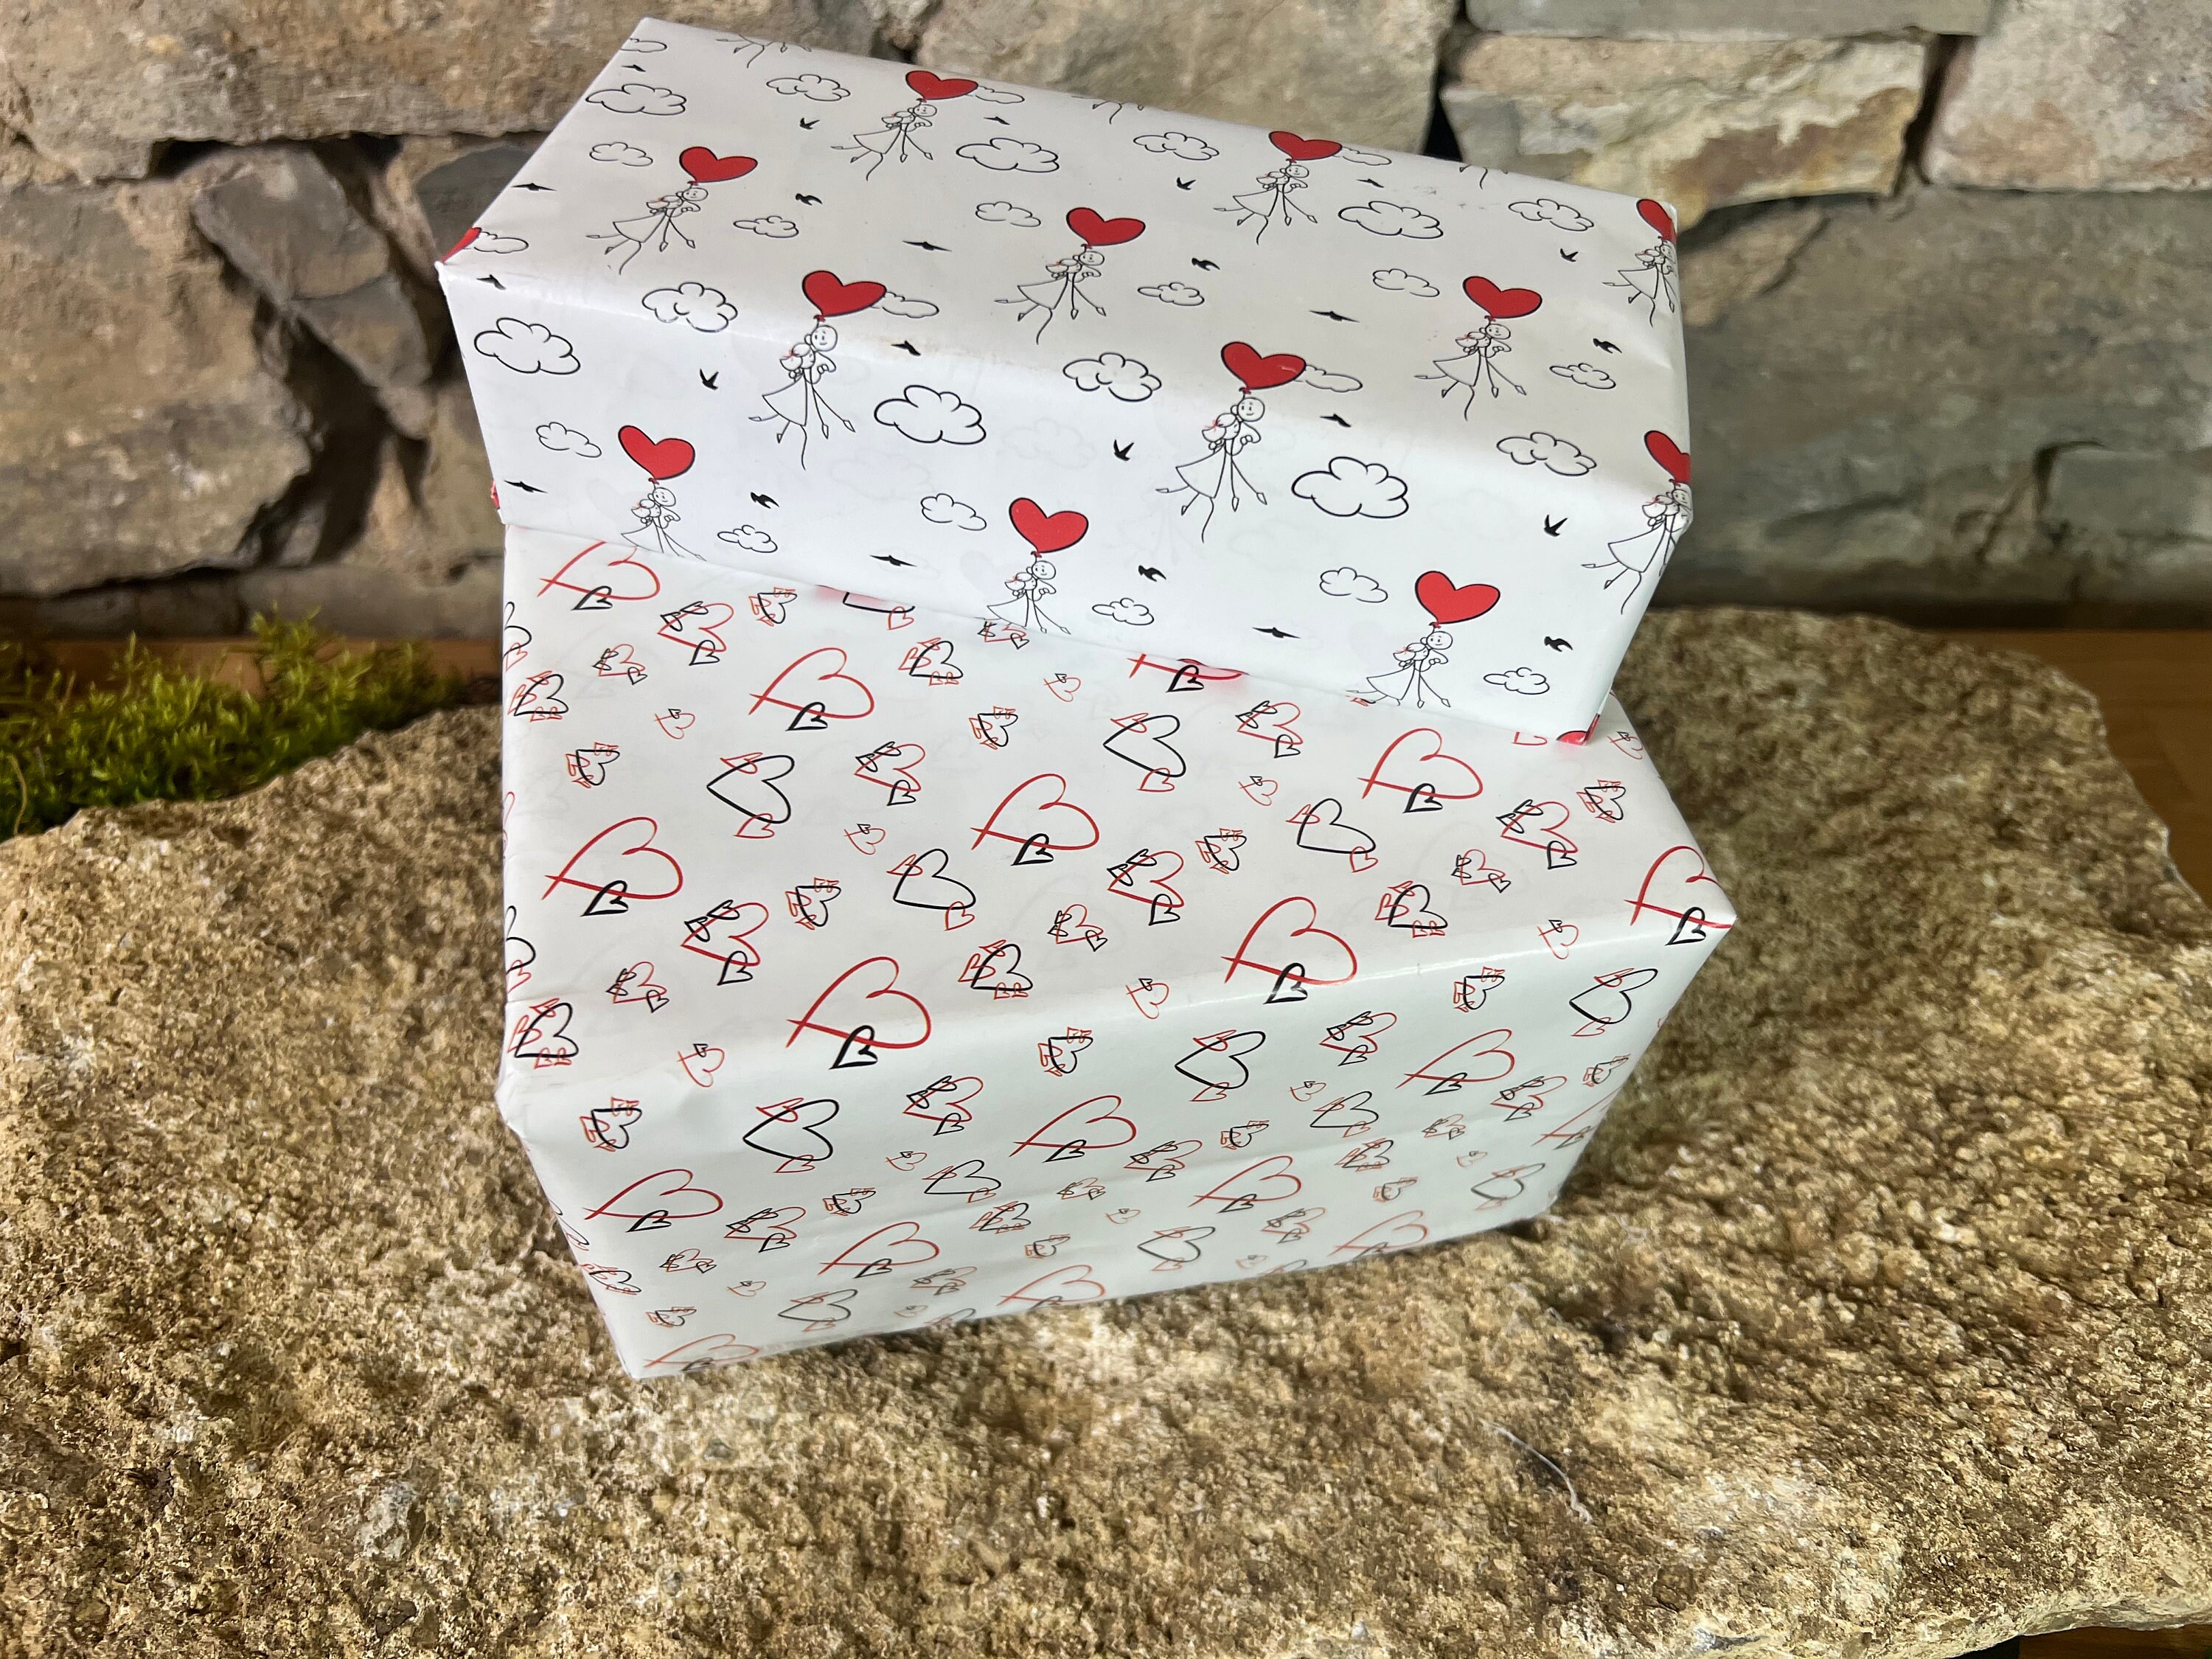  Valentines Wrapping Paper,6 Sheets 6 Designs Funny Kiss Love  Heart Gift Wrapping Paper Adult,Black Pink White Red Gift Wrap Paper Whit 2  Rolls Ribbons For Valentine's Day Wedding Birthday Holiday 